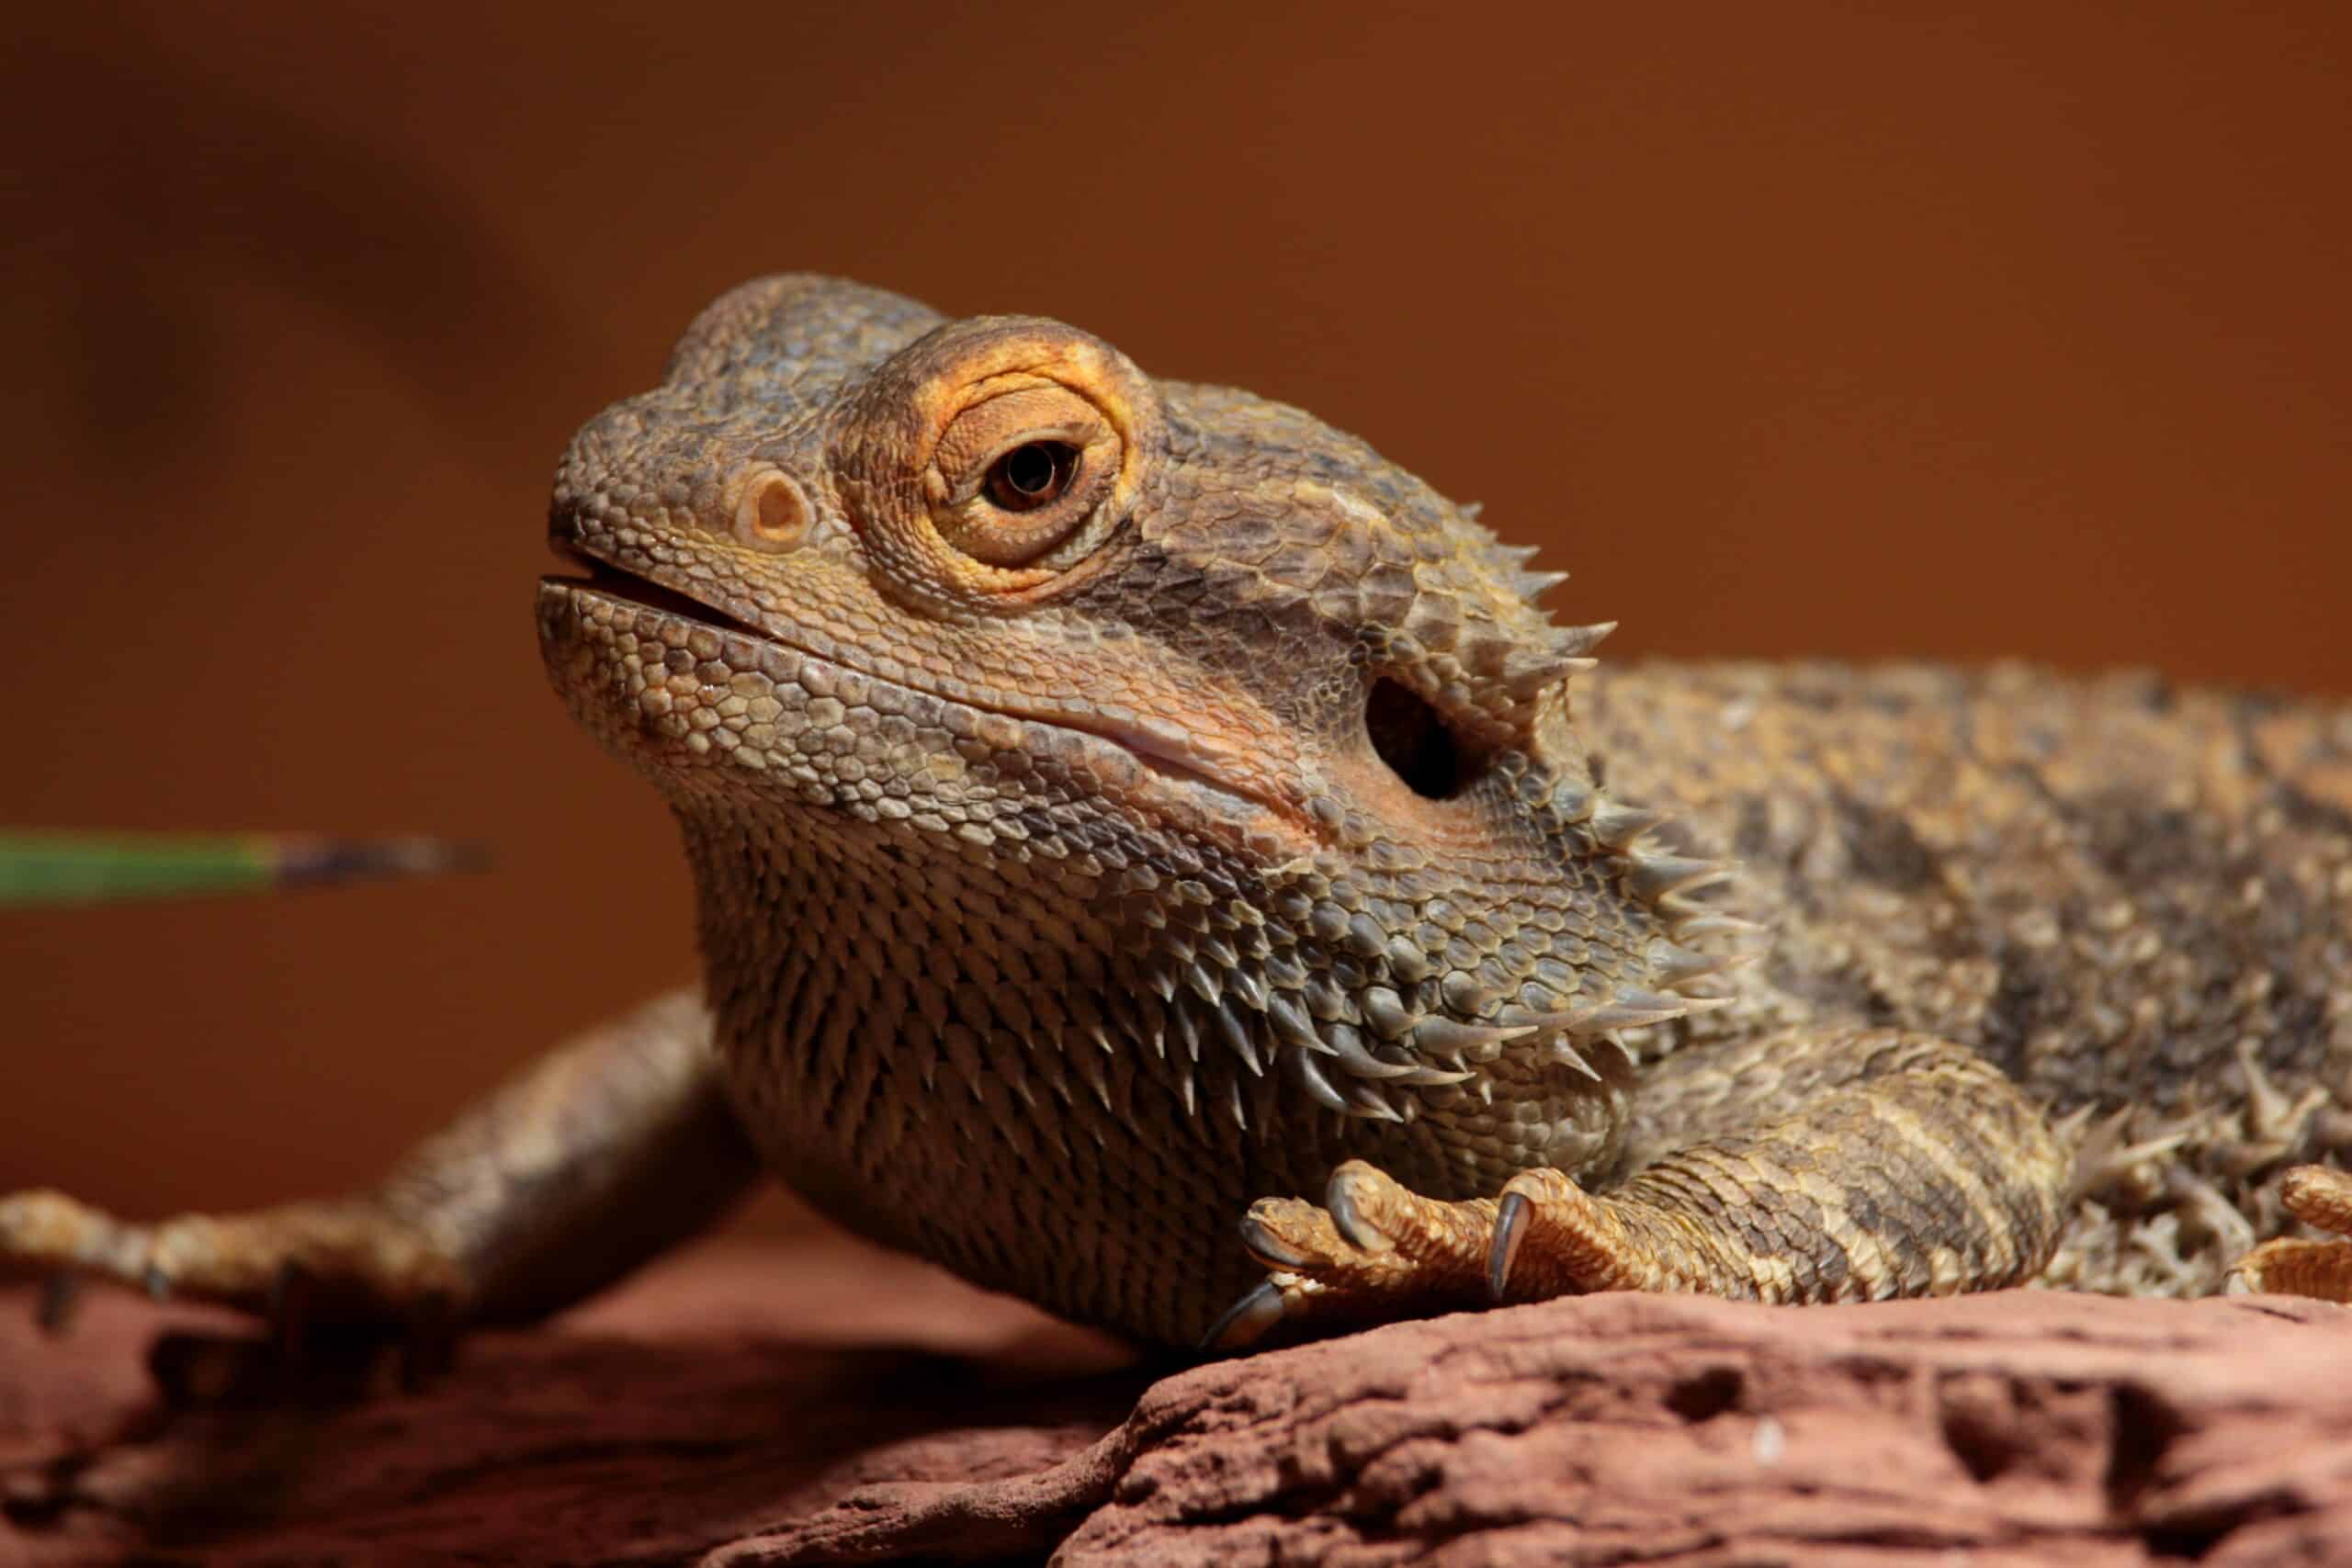 bearded dragon in its enclosure but Can Bearded Dragons Learn Their Name?